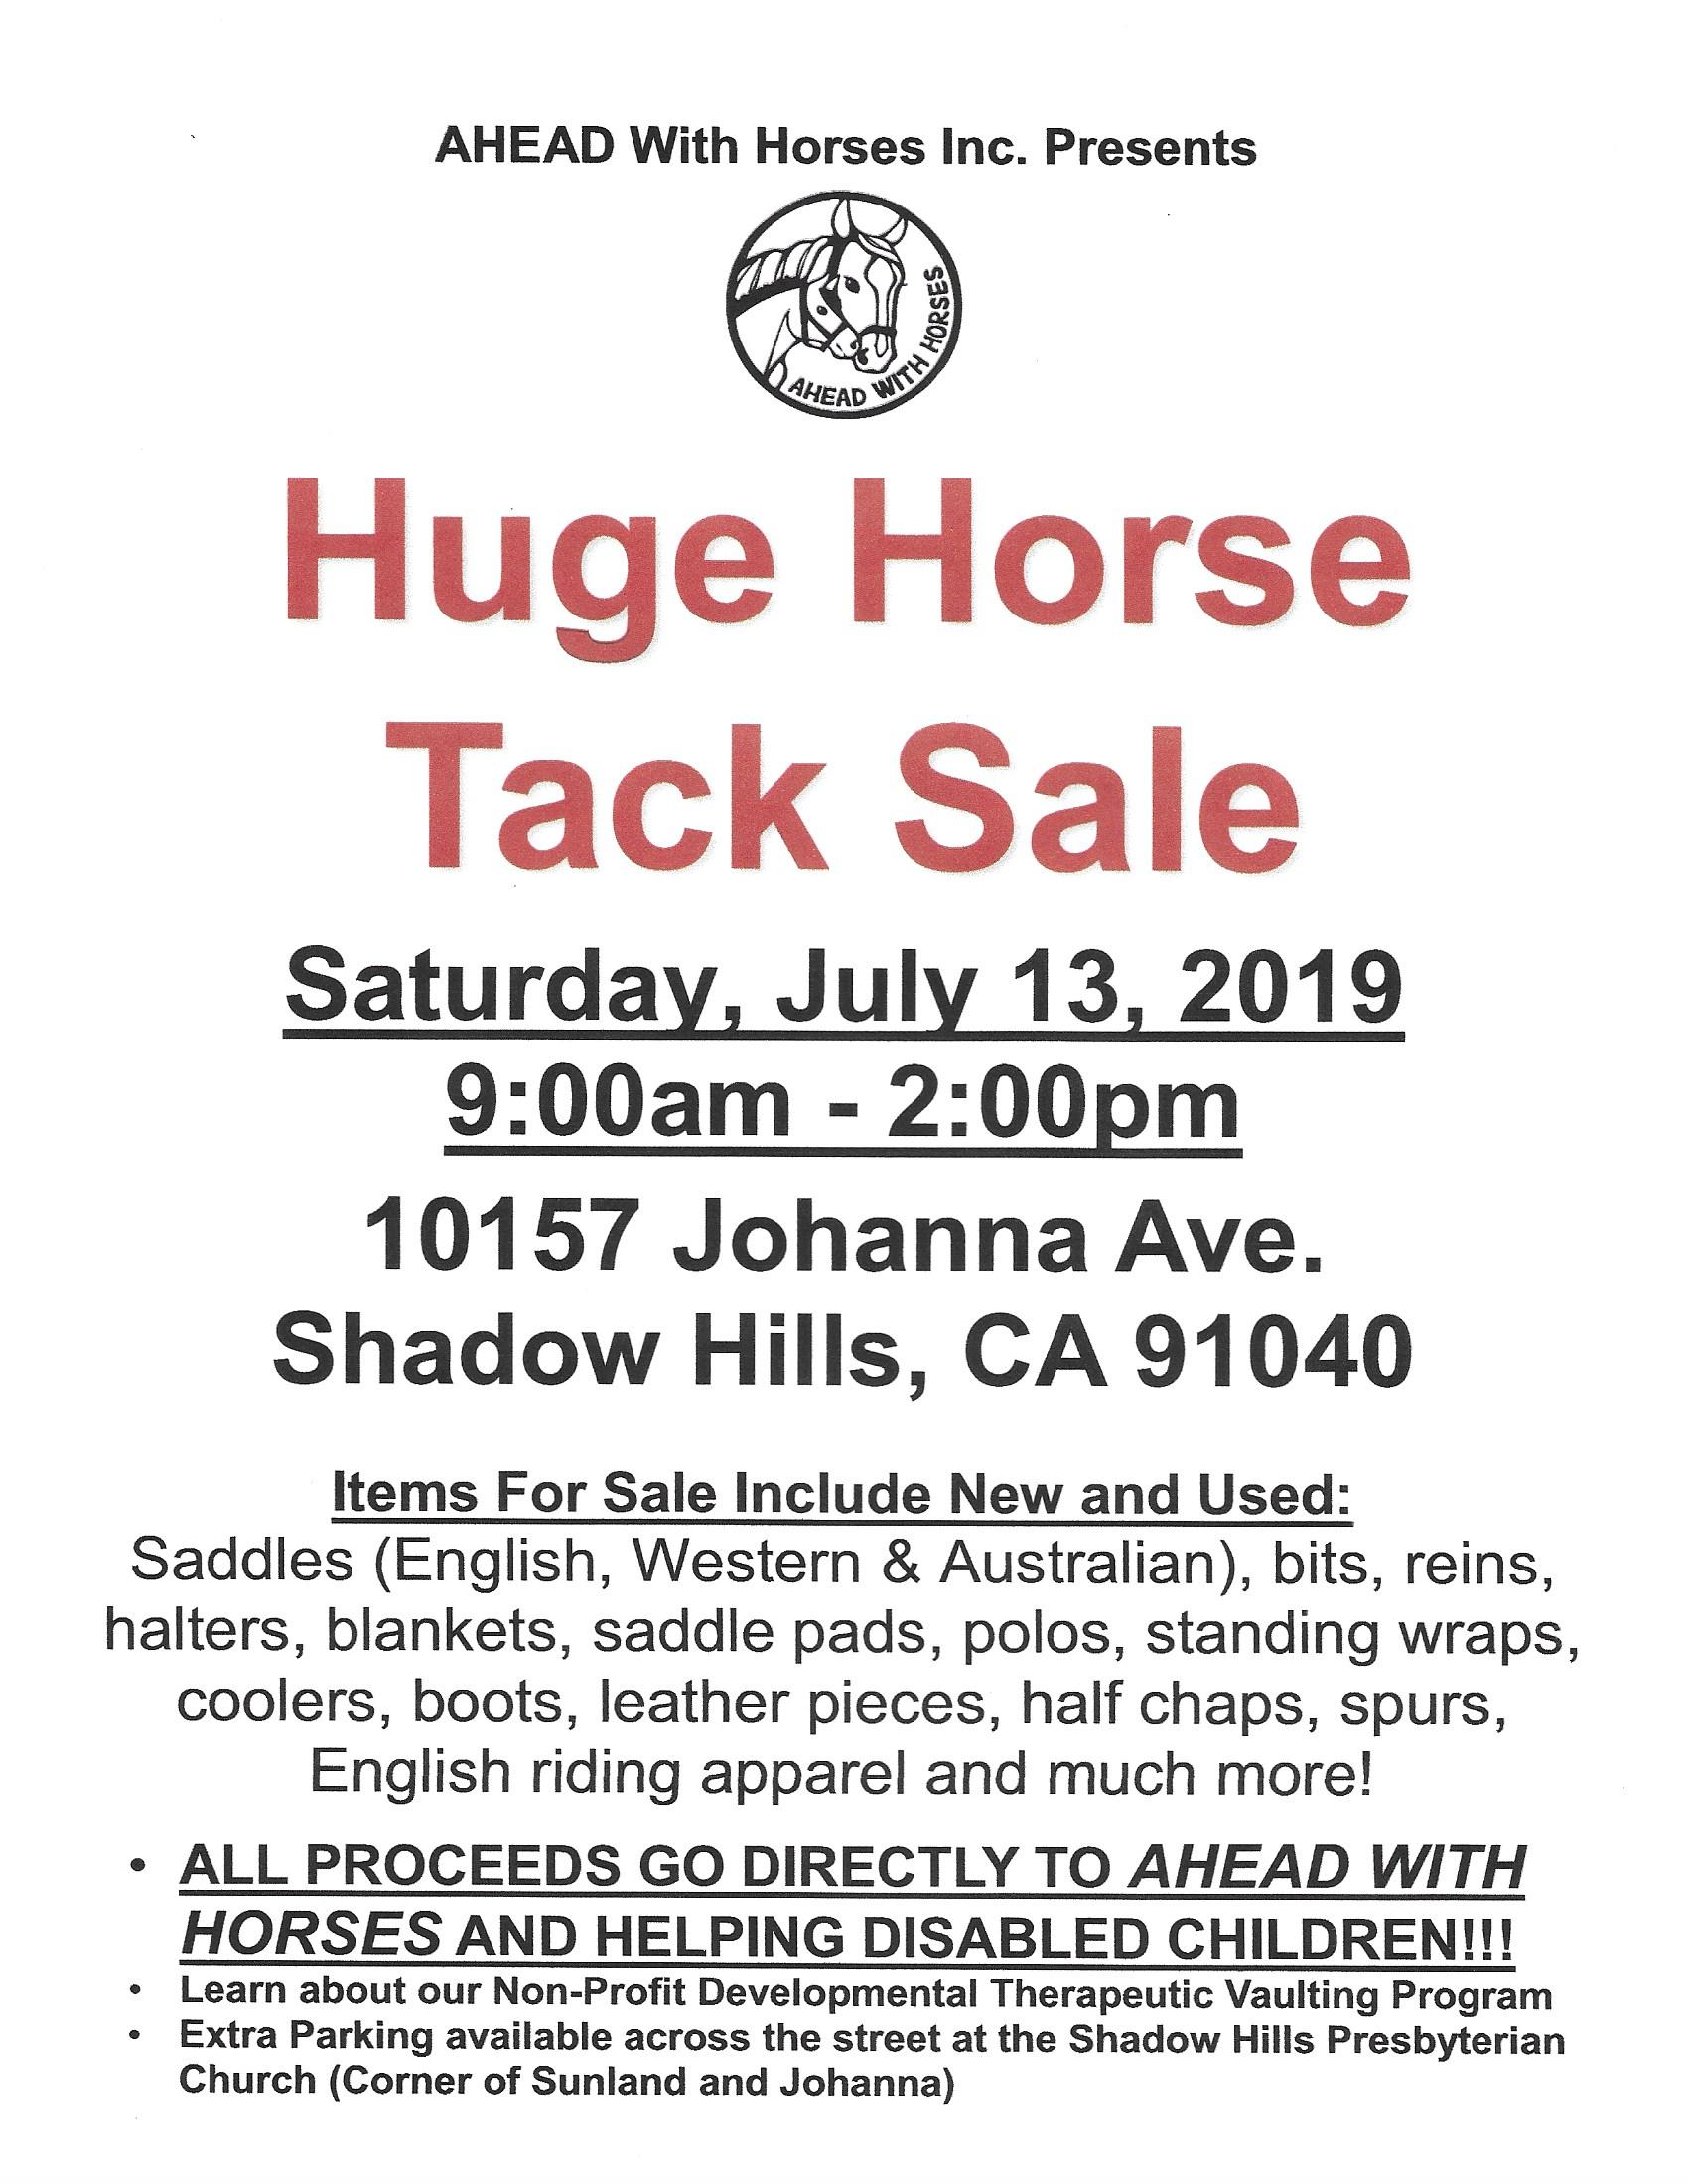 Tack Sale on 7/13/19 Ahead with Horses